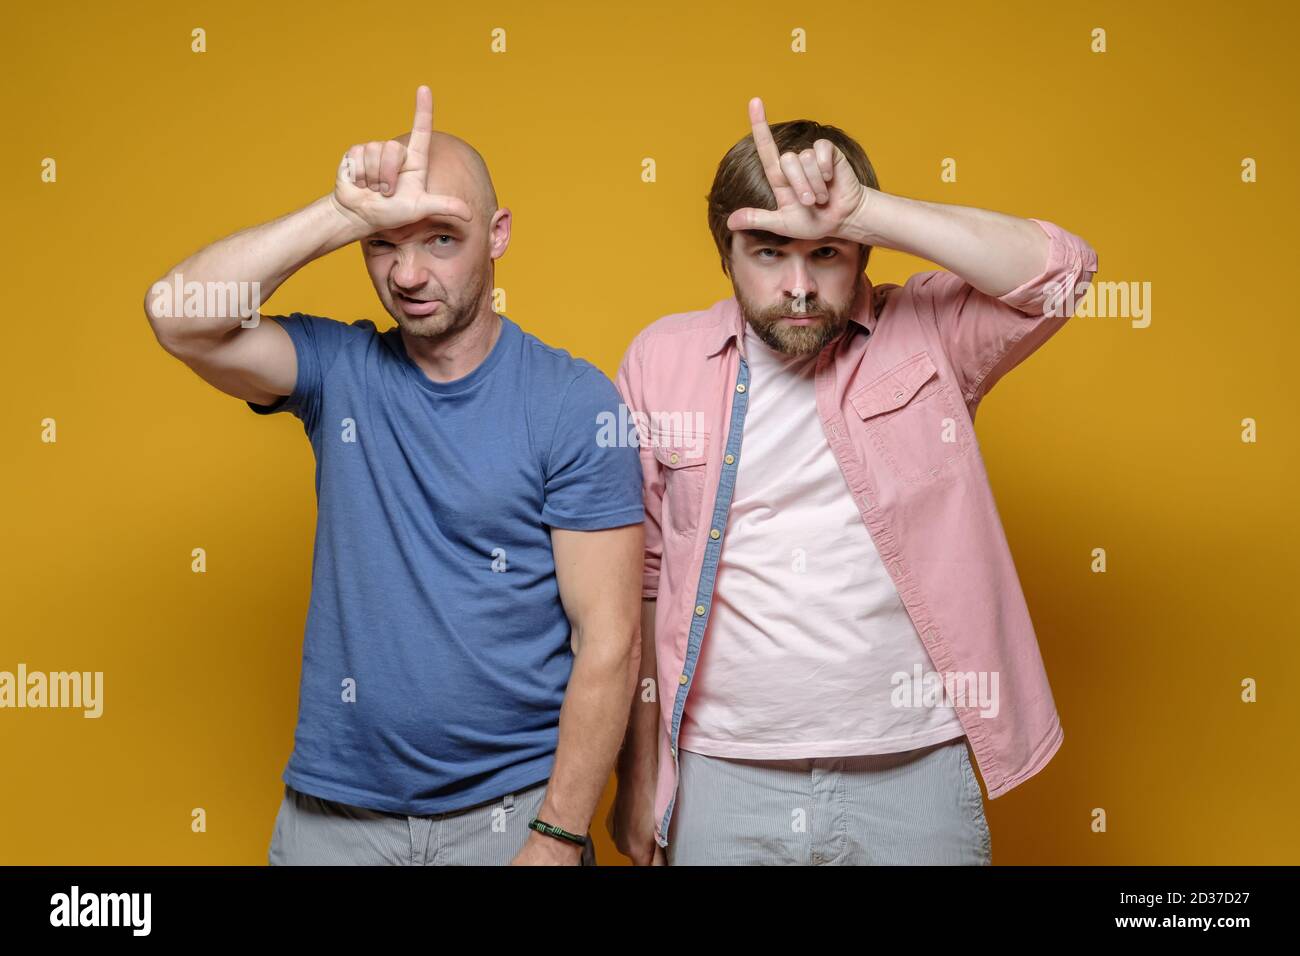 Two serious men in casual clothes are making mocking of someone by making a loser gesture with their fingers on their foreheads.  Stock Photo